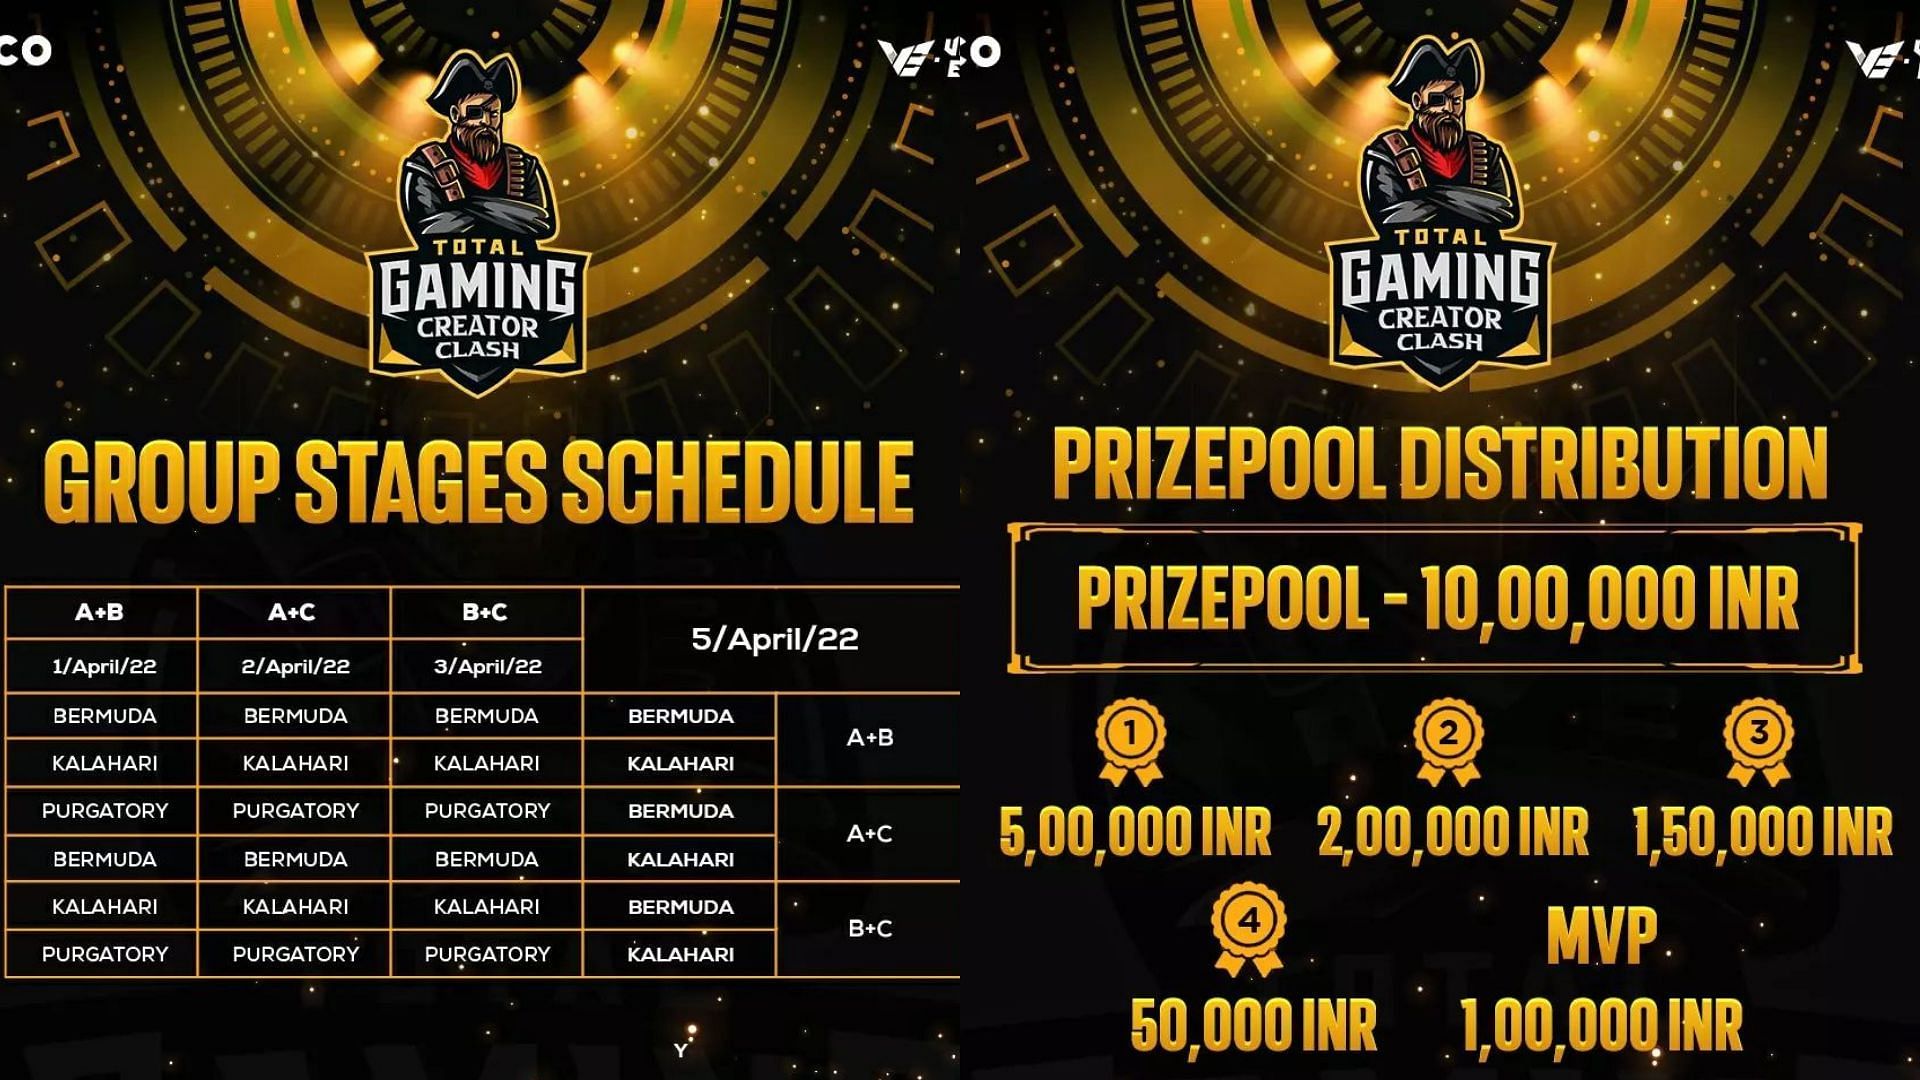 Free Fire Creator Clash Schedule and Prize Pool distribution (Image via Villager Esports)